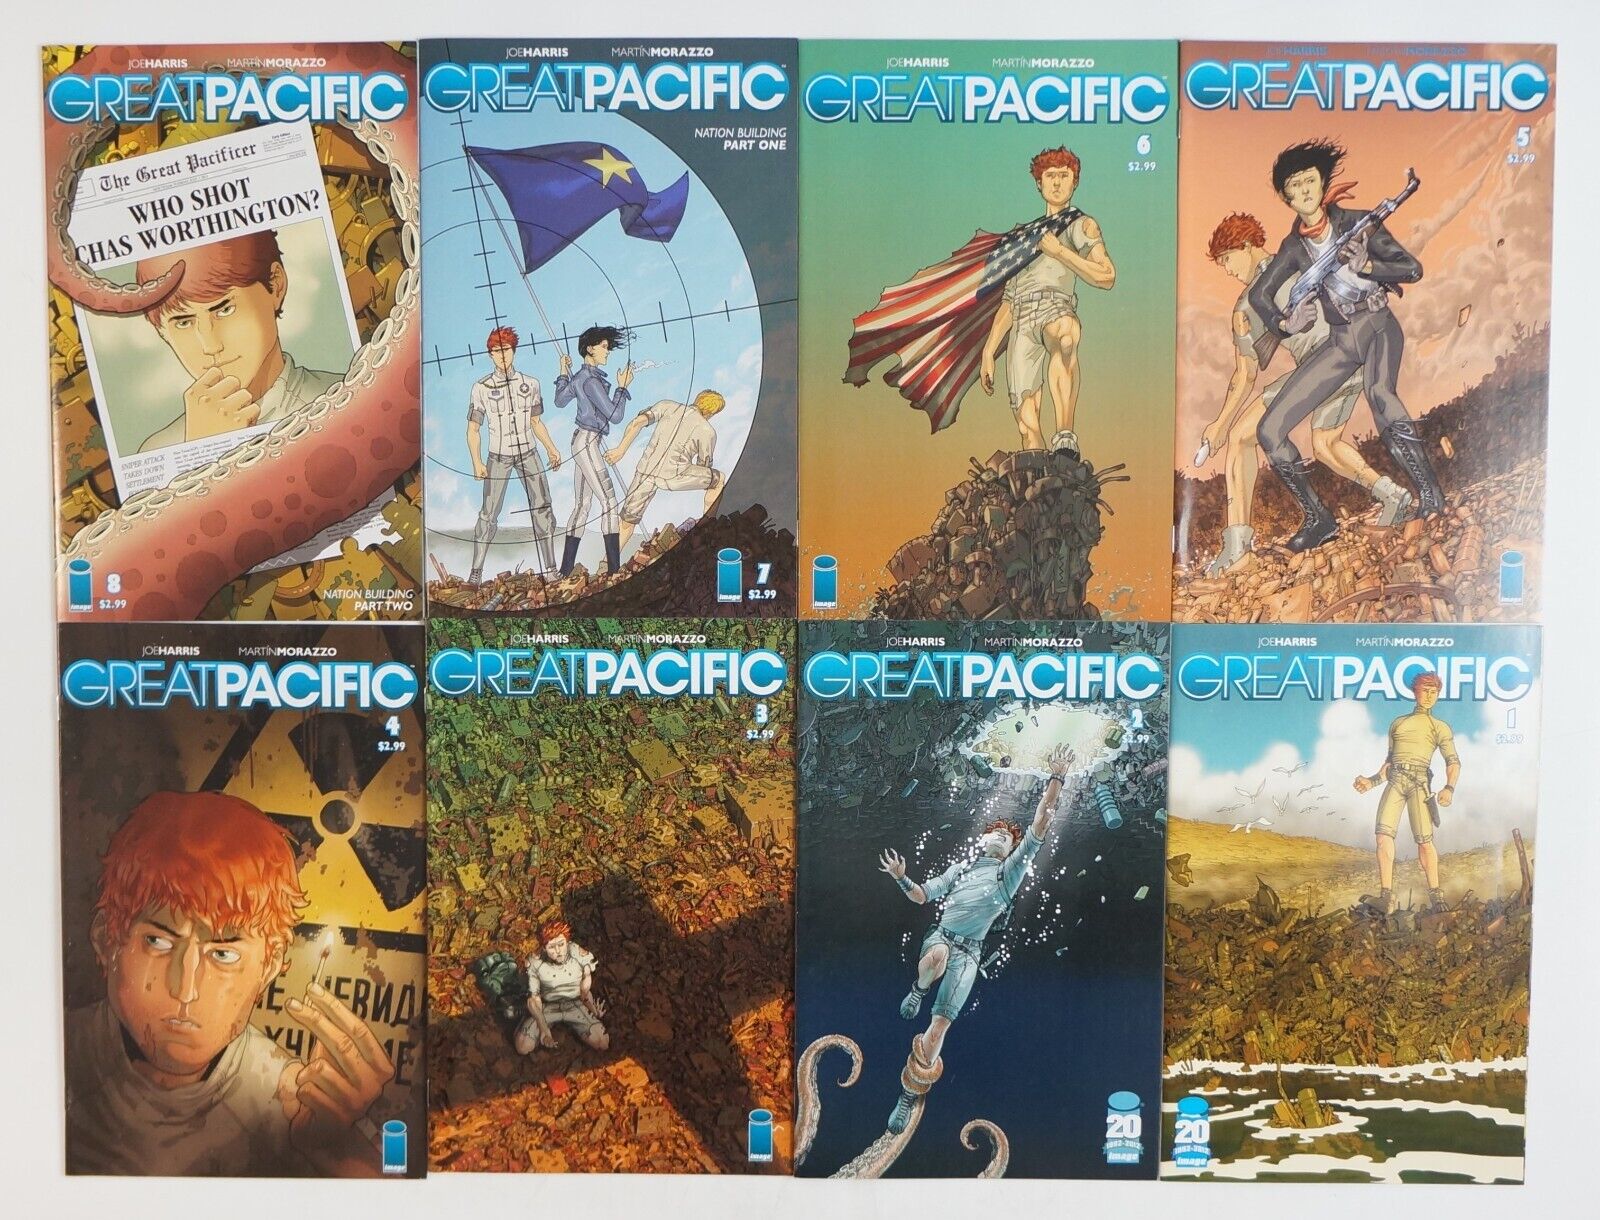 Great Pacific #1-18 VF/NM complete series - Image Comics environmental thriller